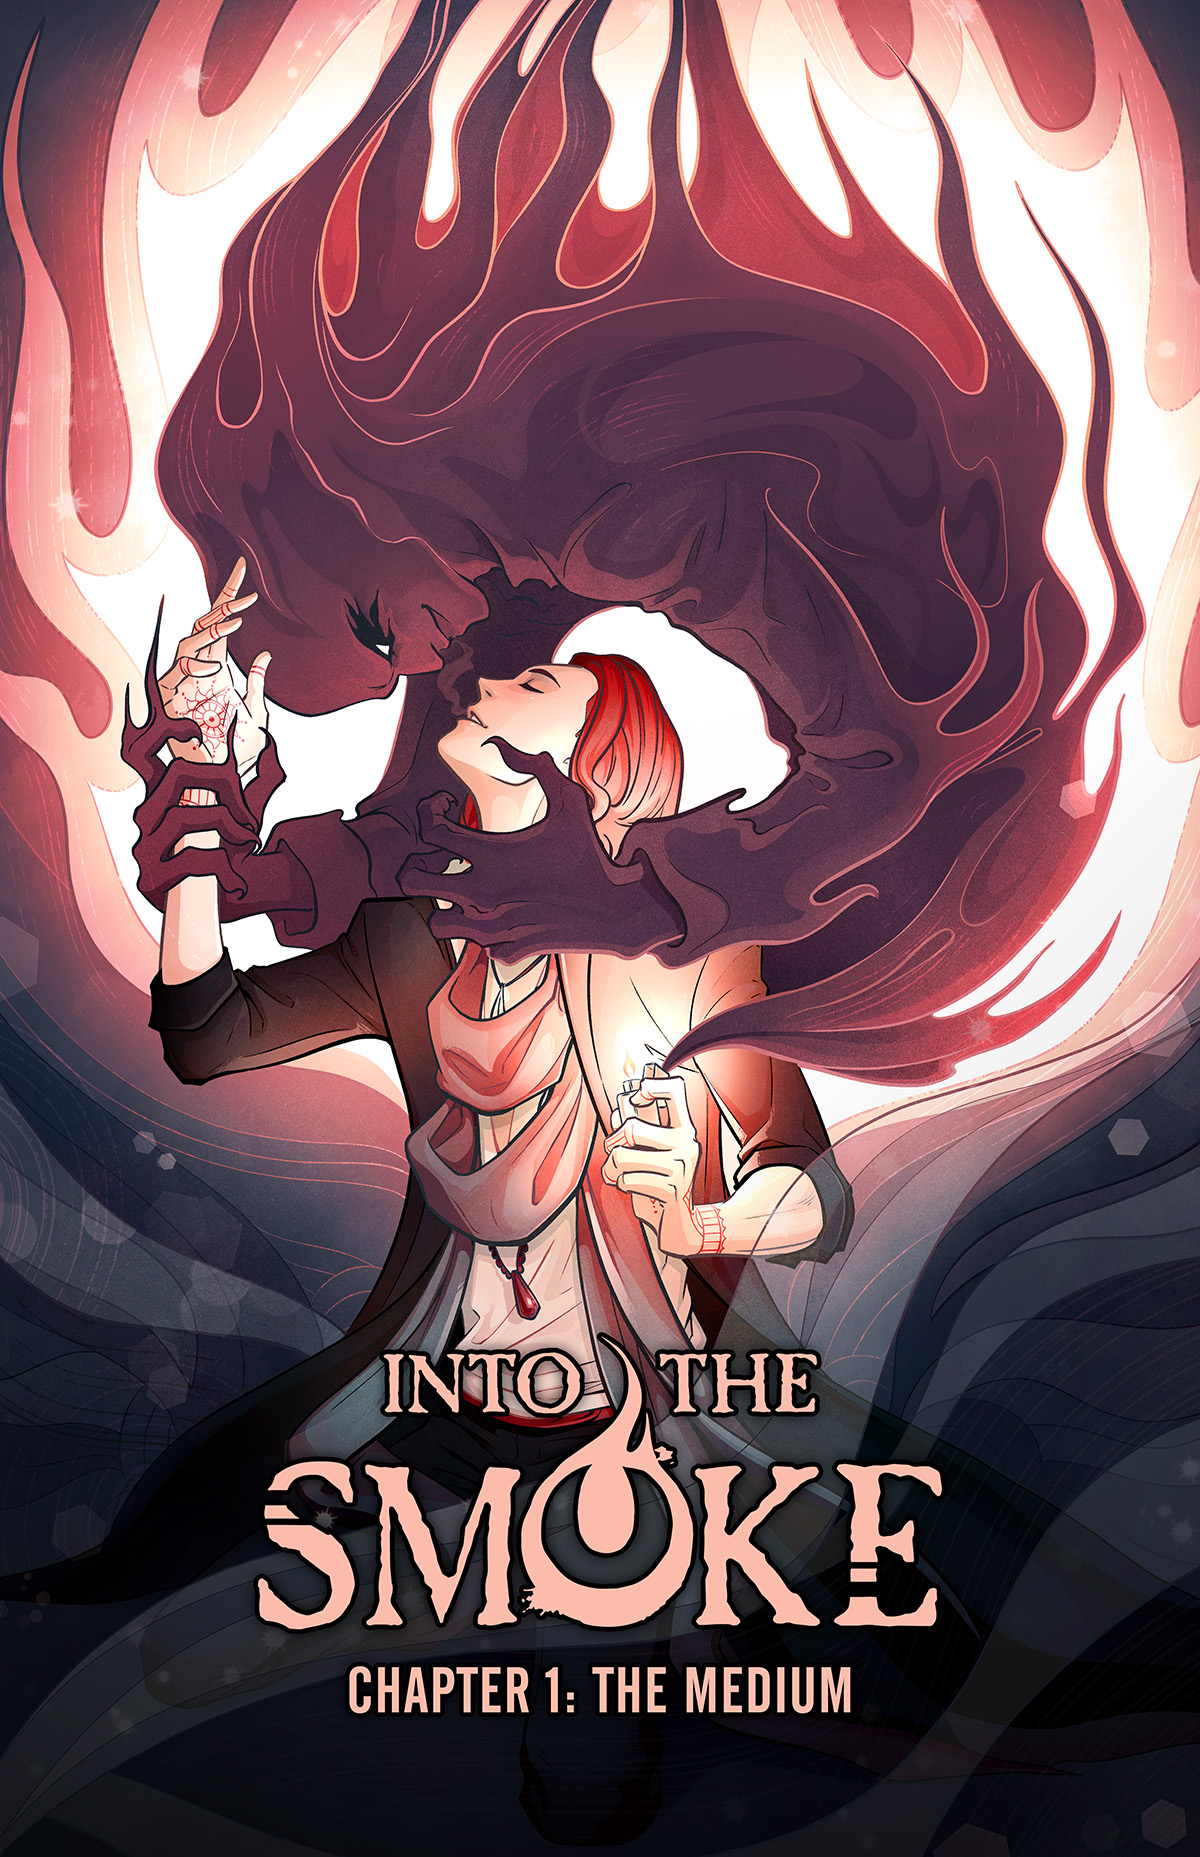 The cover of Into the Smoke chapter 1. Blaze, a spirit medium with shoulder-length red hair and tattooed hands uses a lighter to summon Alastor, a dark, smoky ghost, who holds the medium while inhaling his breath. Text reads: Into the Smoke. Chapter 1: The Medium.